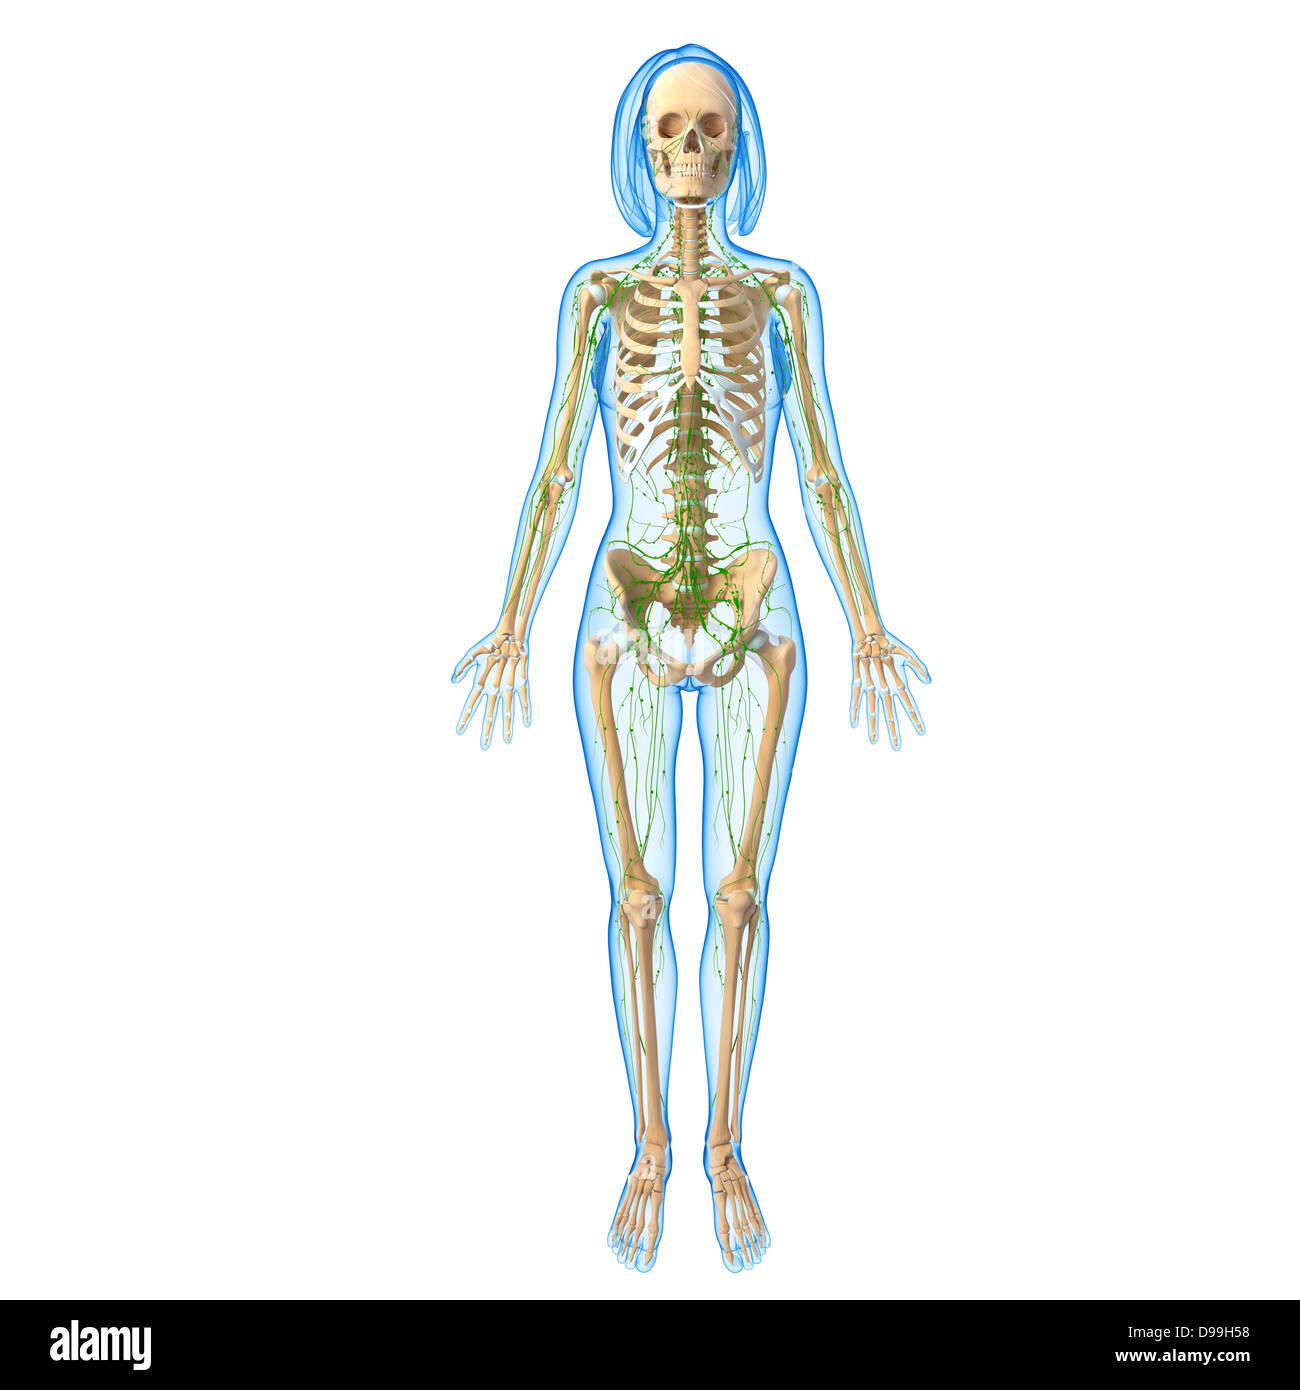 Lymphatic system of human body anatomy Stock Photo